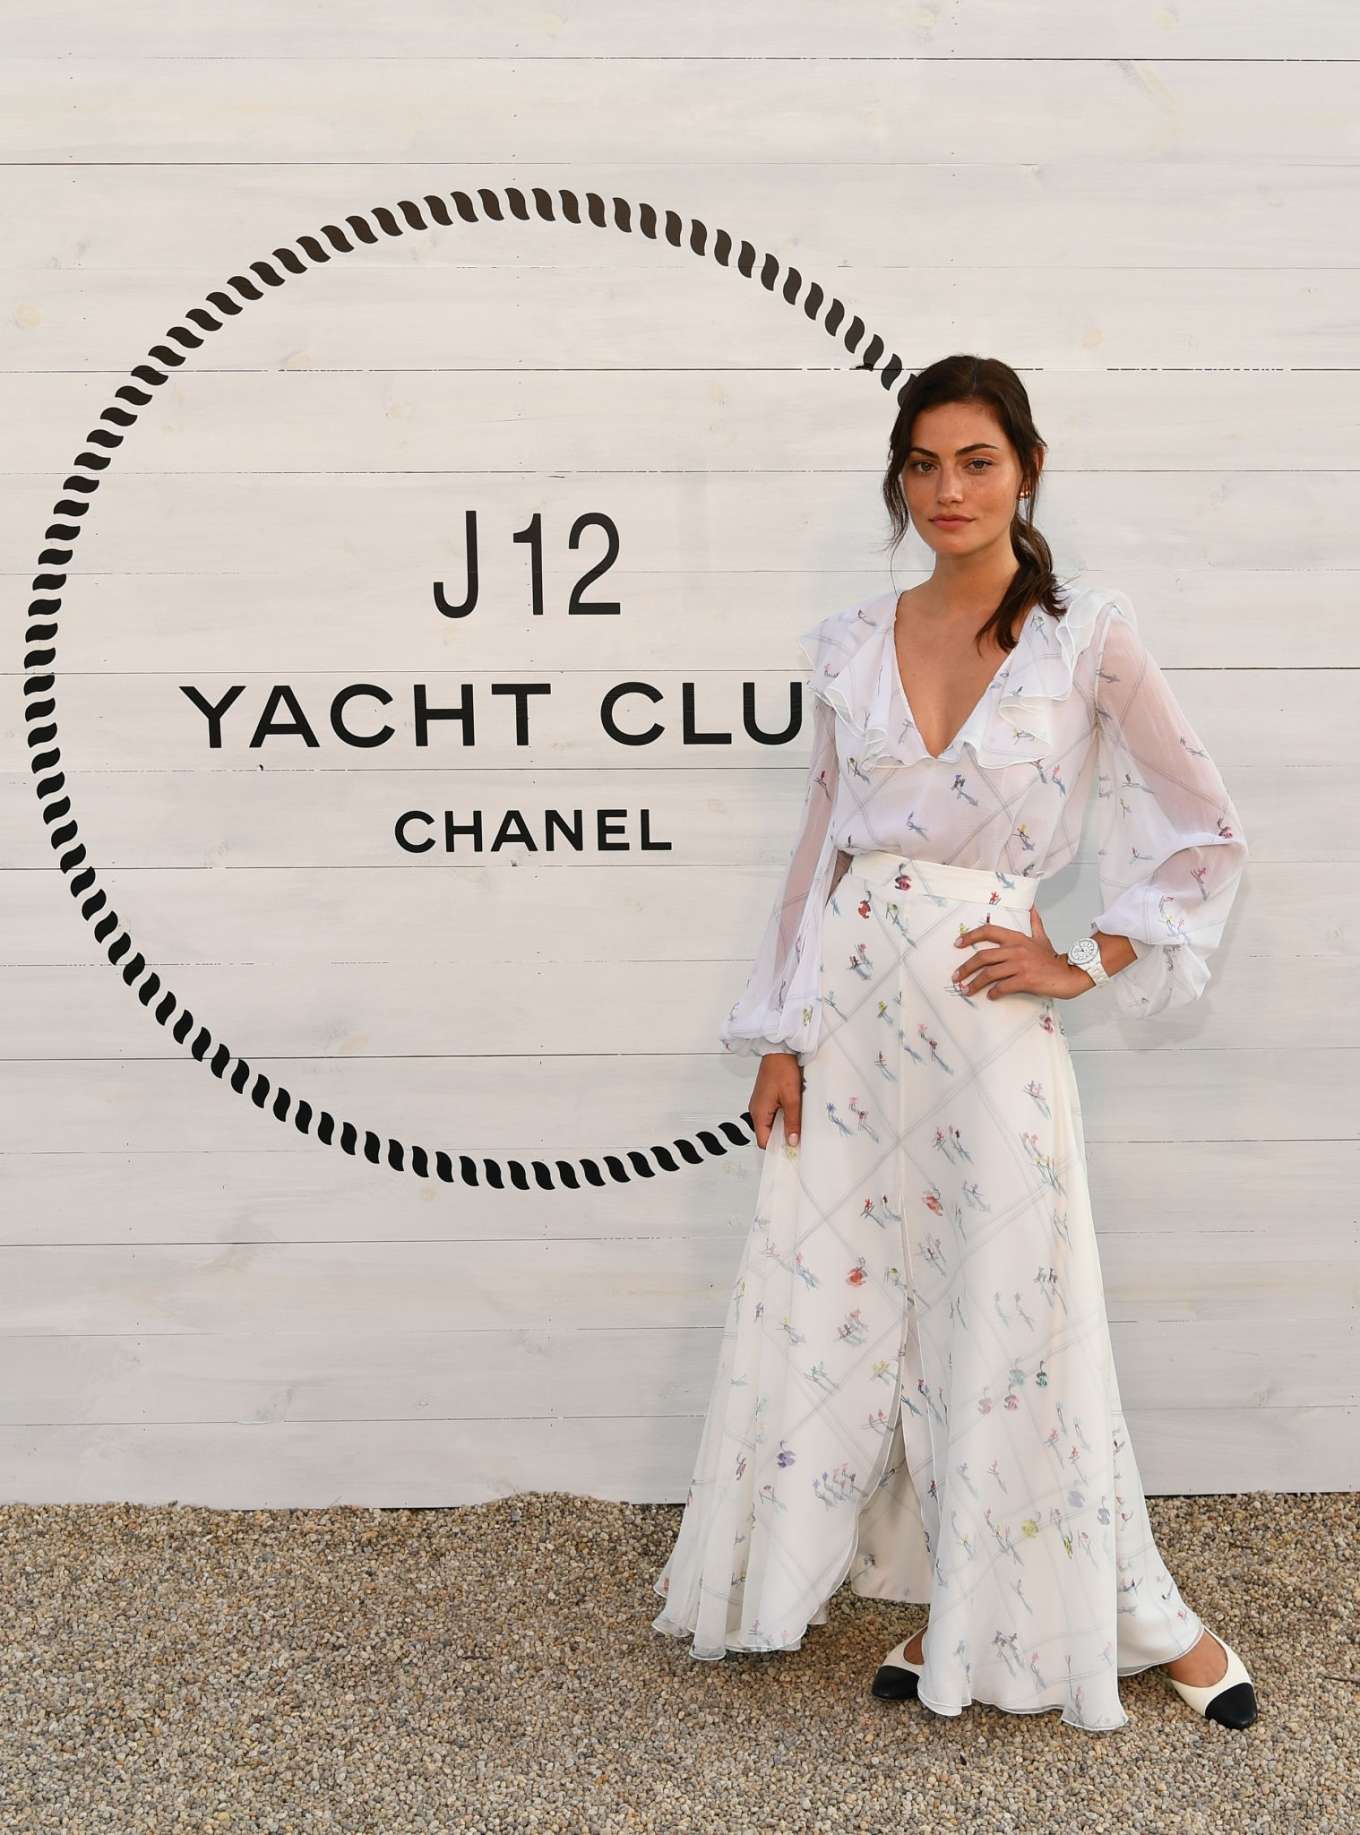 Phoebe Tonkin â€“ CHANEL Dinner to celebrate The J12 Yacht Club in New York